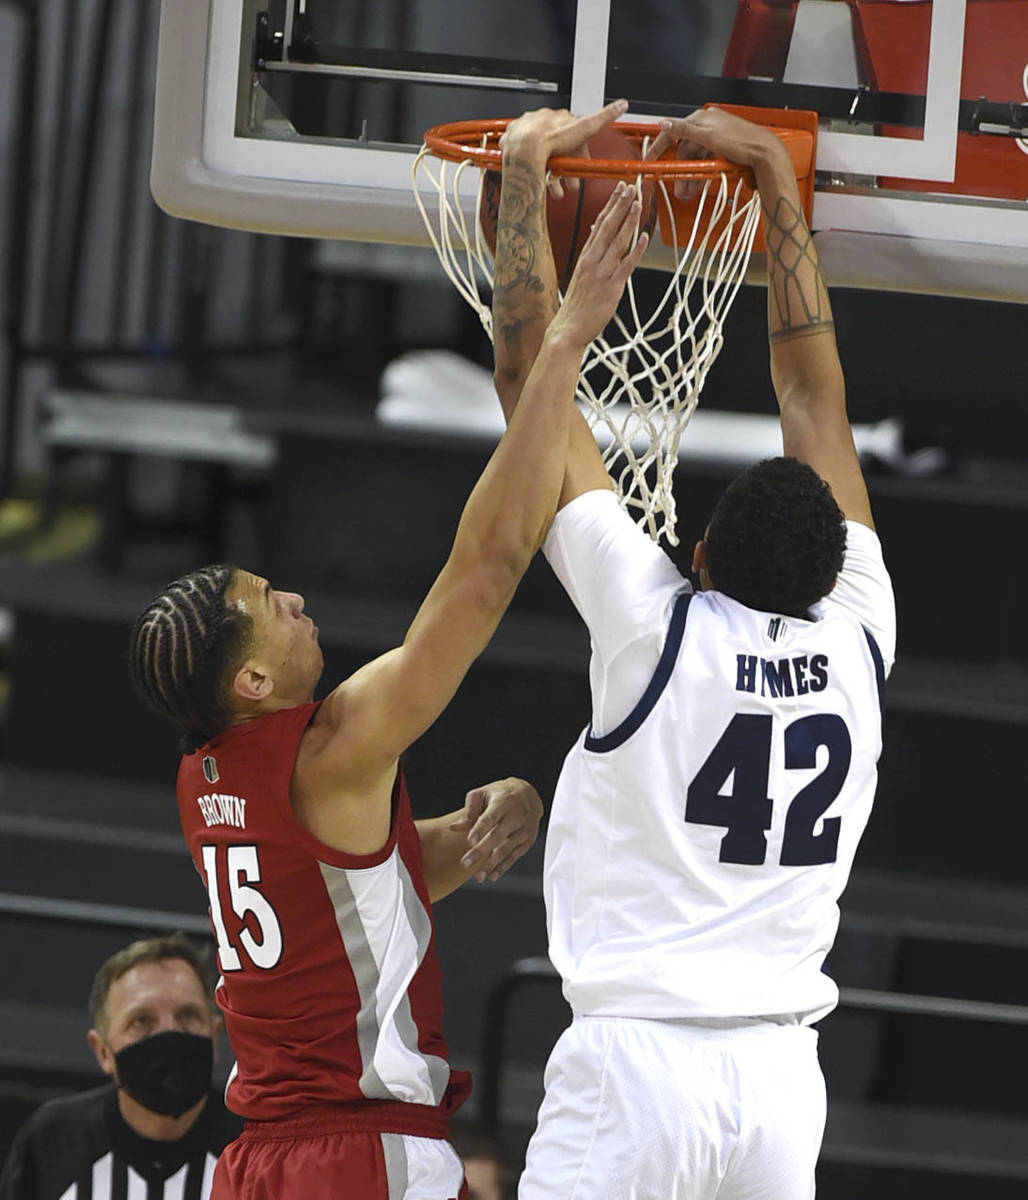 UNR's Kwamé "K.J." Hymes Jr. (42) dunks against UNLV's Reece Brown in the first half of an NCA ...